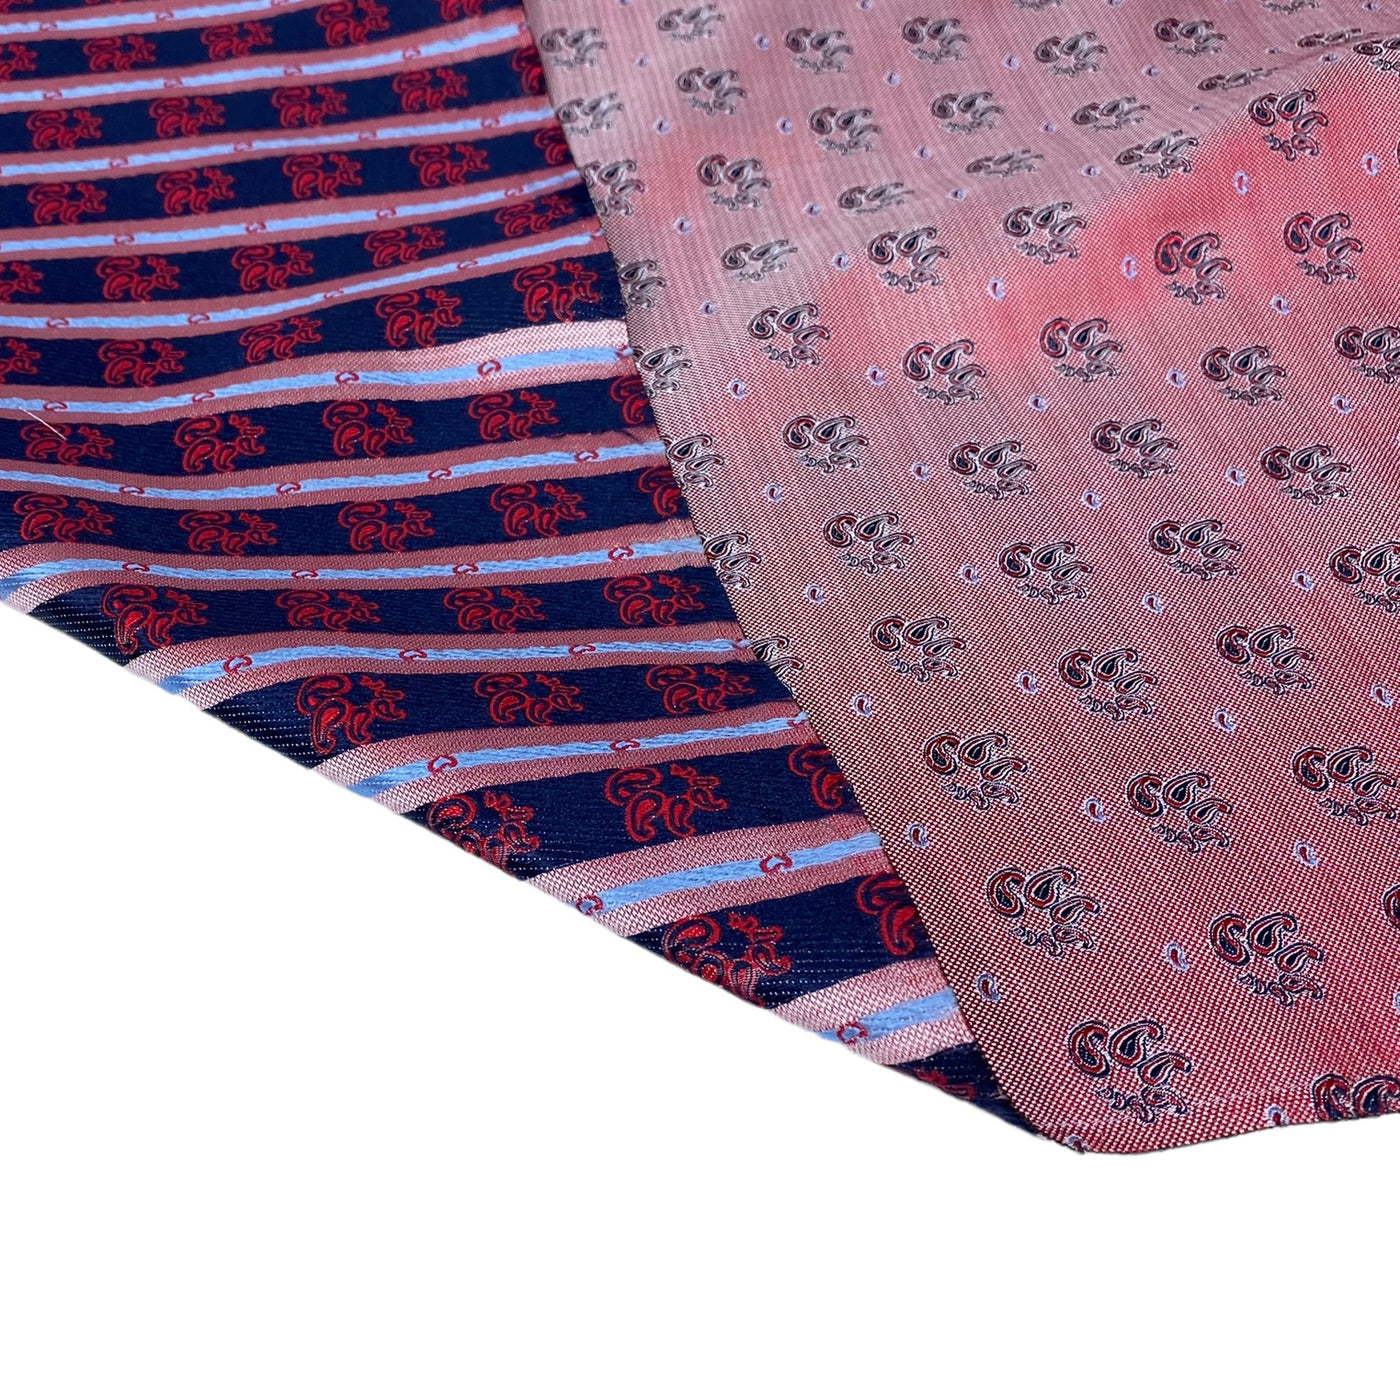 Paisley Polyester Jacquard - Red / White / Blue